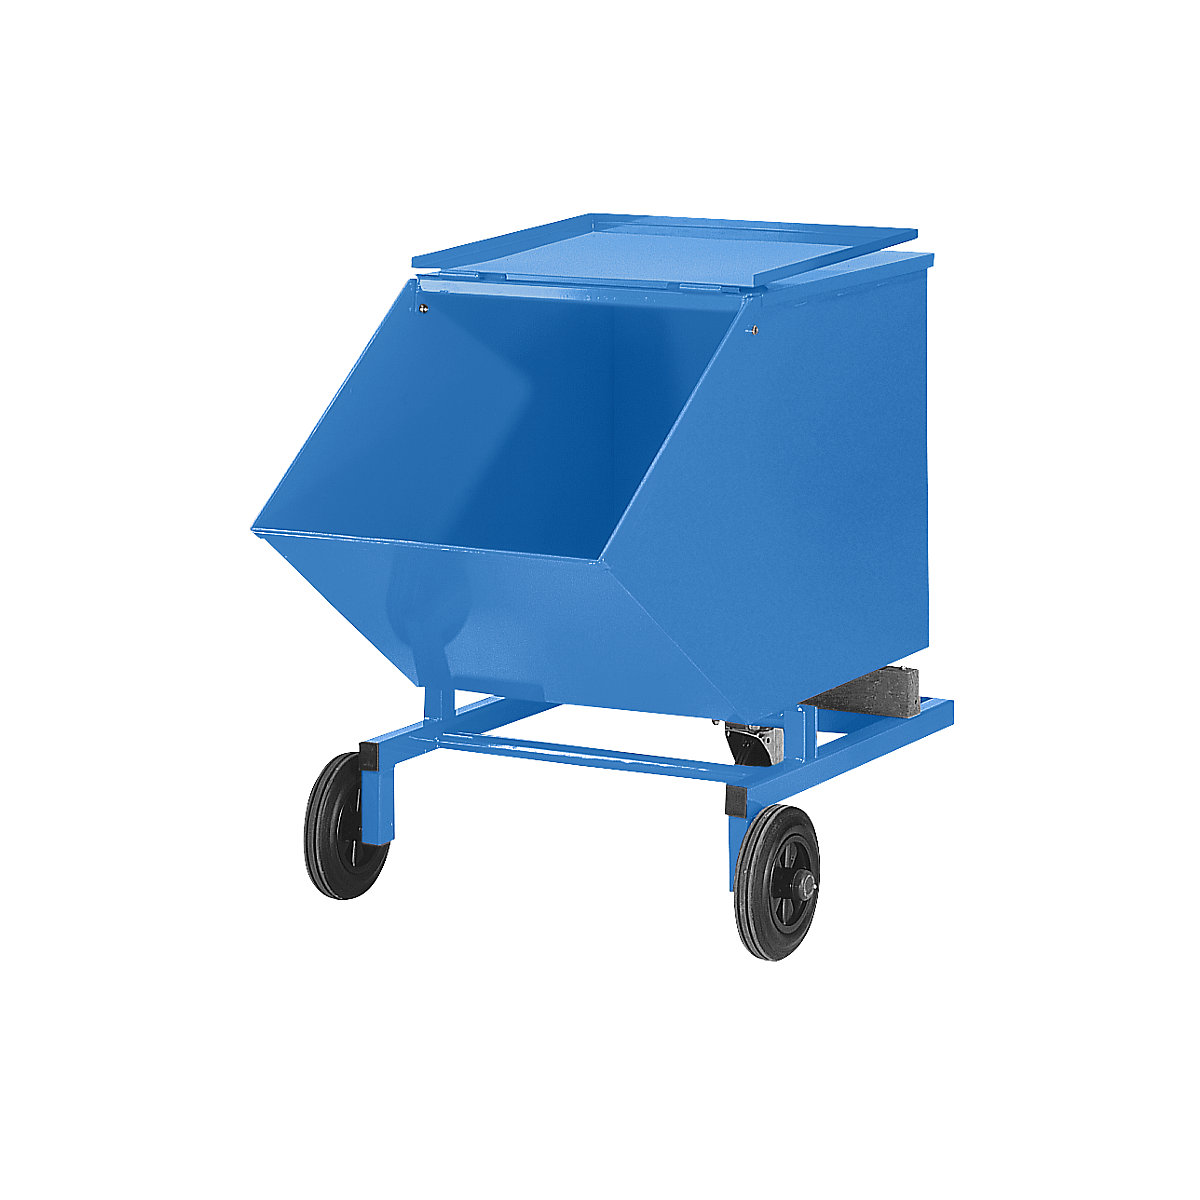 Tilting skip for bulk material – eurokraft pro, with solid rubber tyres, capacity 0.4 m³-4